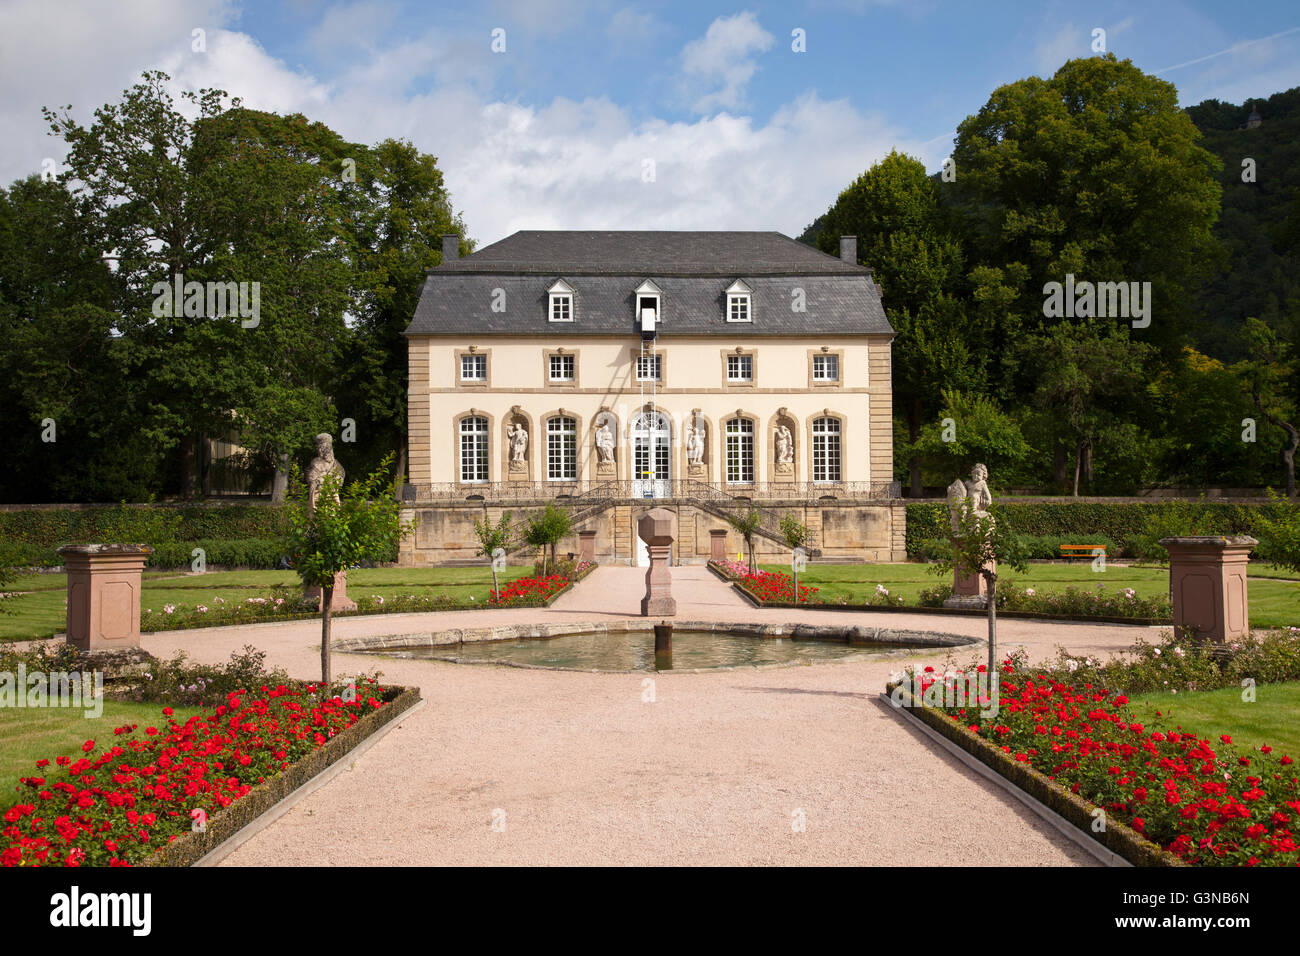 Orangery of the former Abbey of St. Willibrord, Echternach, Luxembourg, Europe Stock Photo